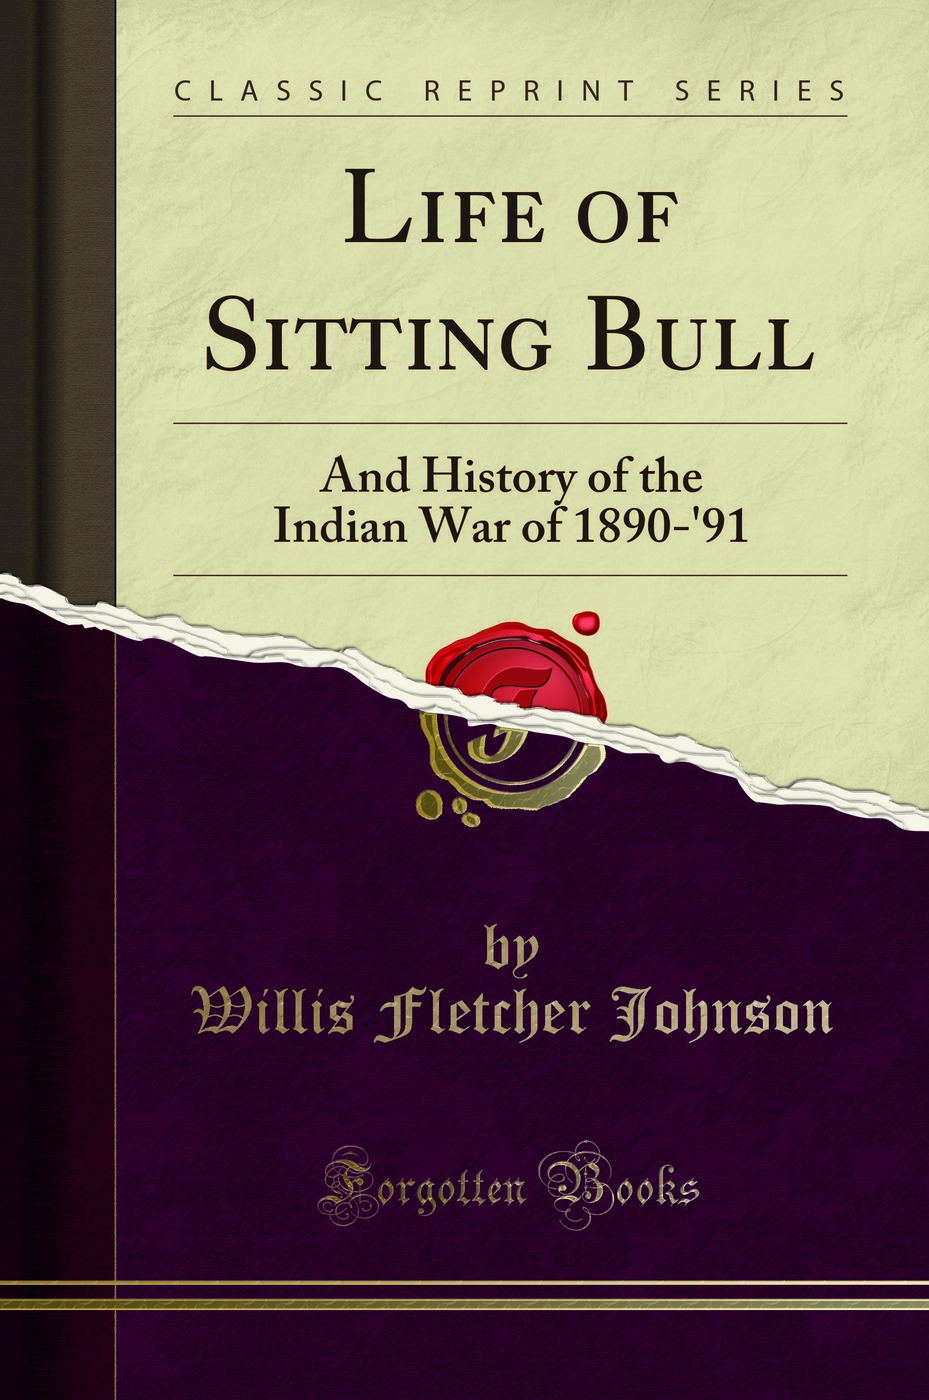 Life of Sitting Bull: And History of the Indian War of 1890-'91 - Willis Fletcher Johnson